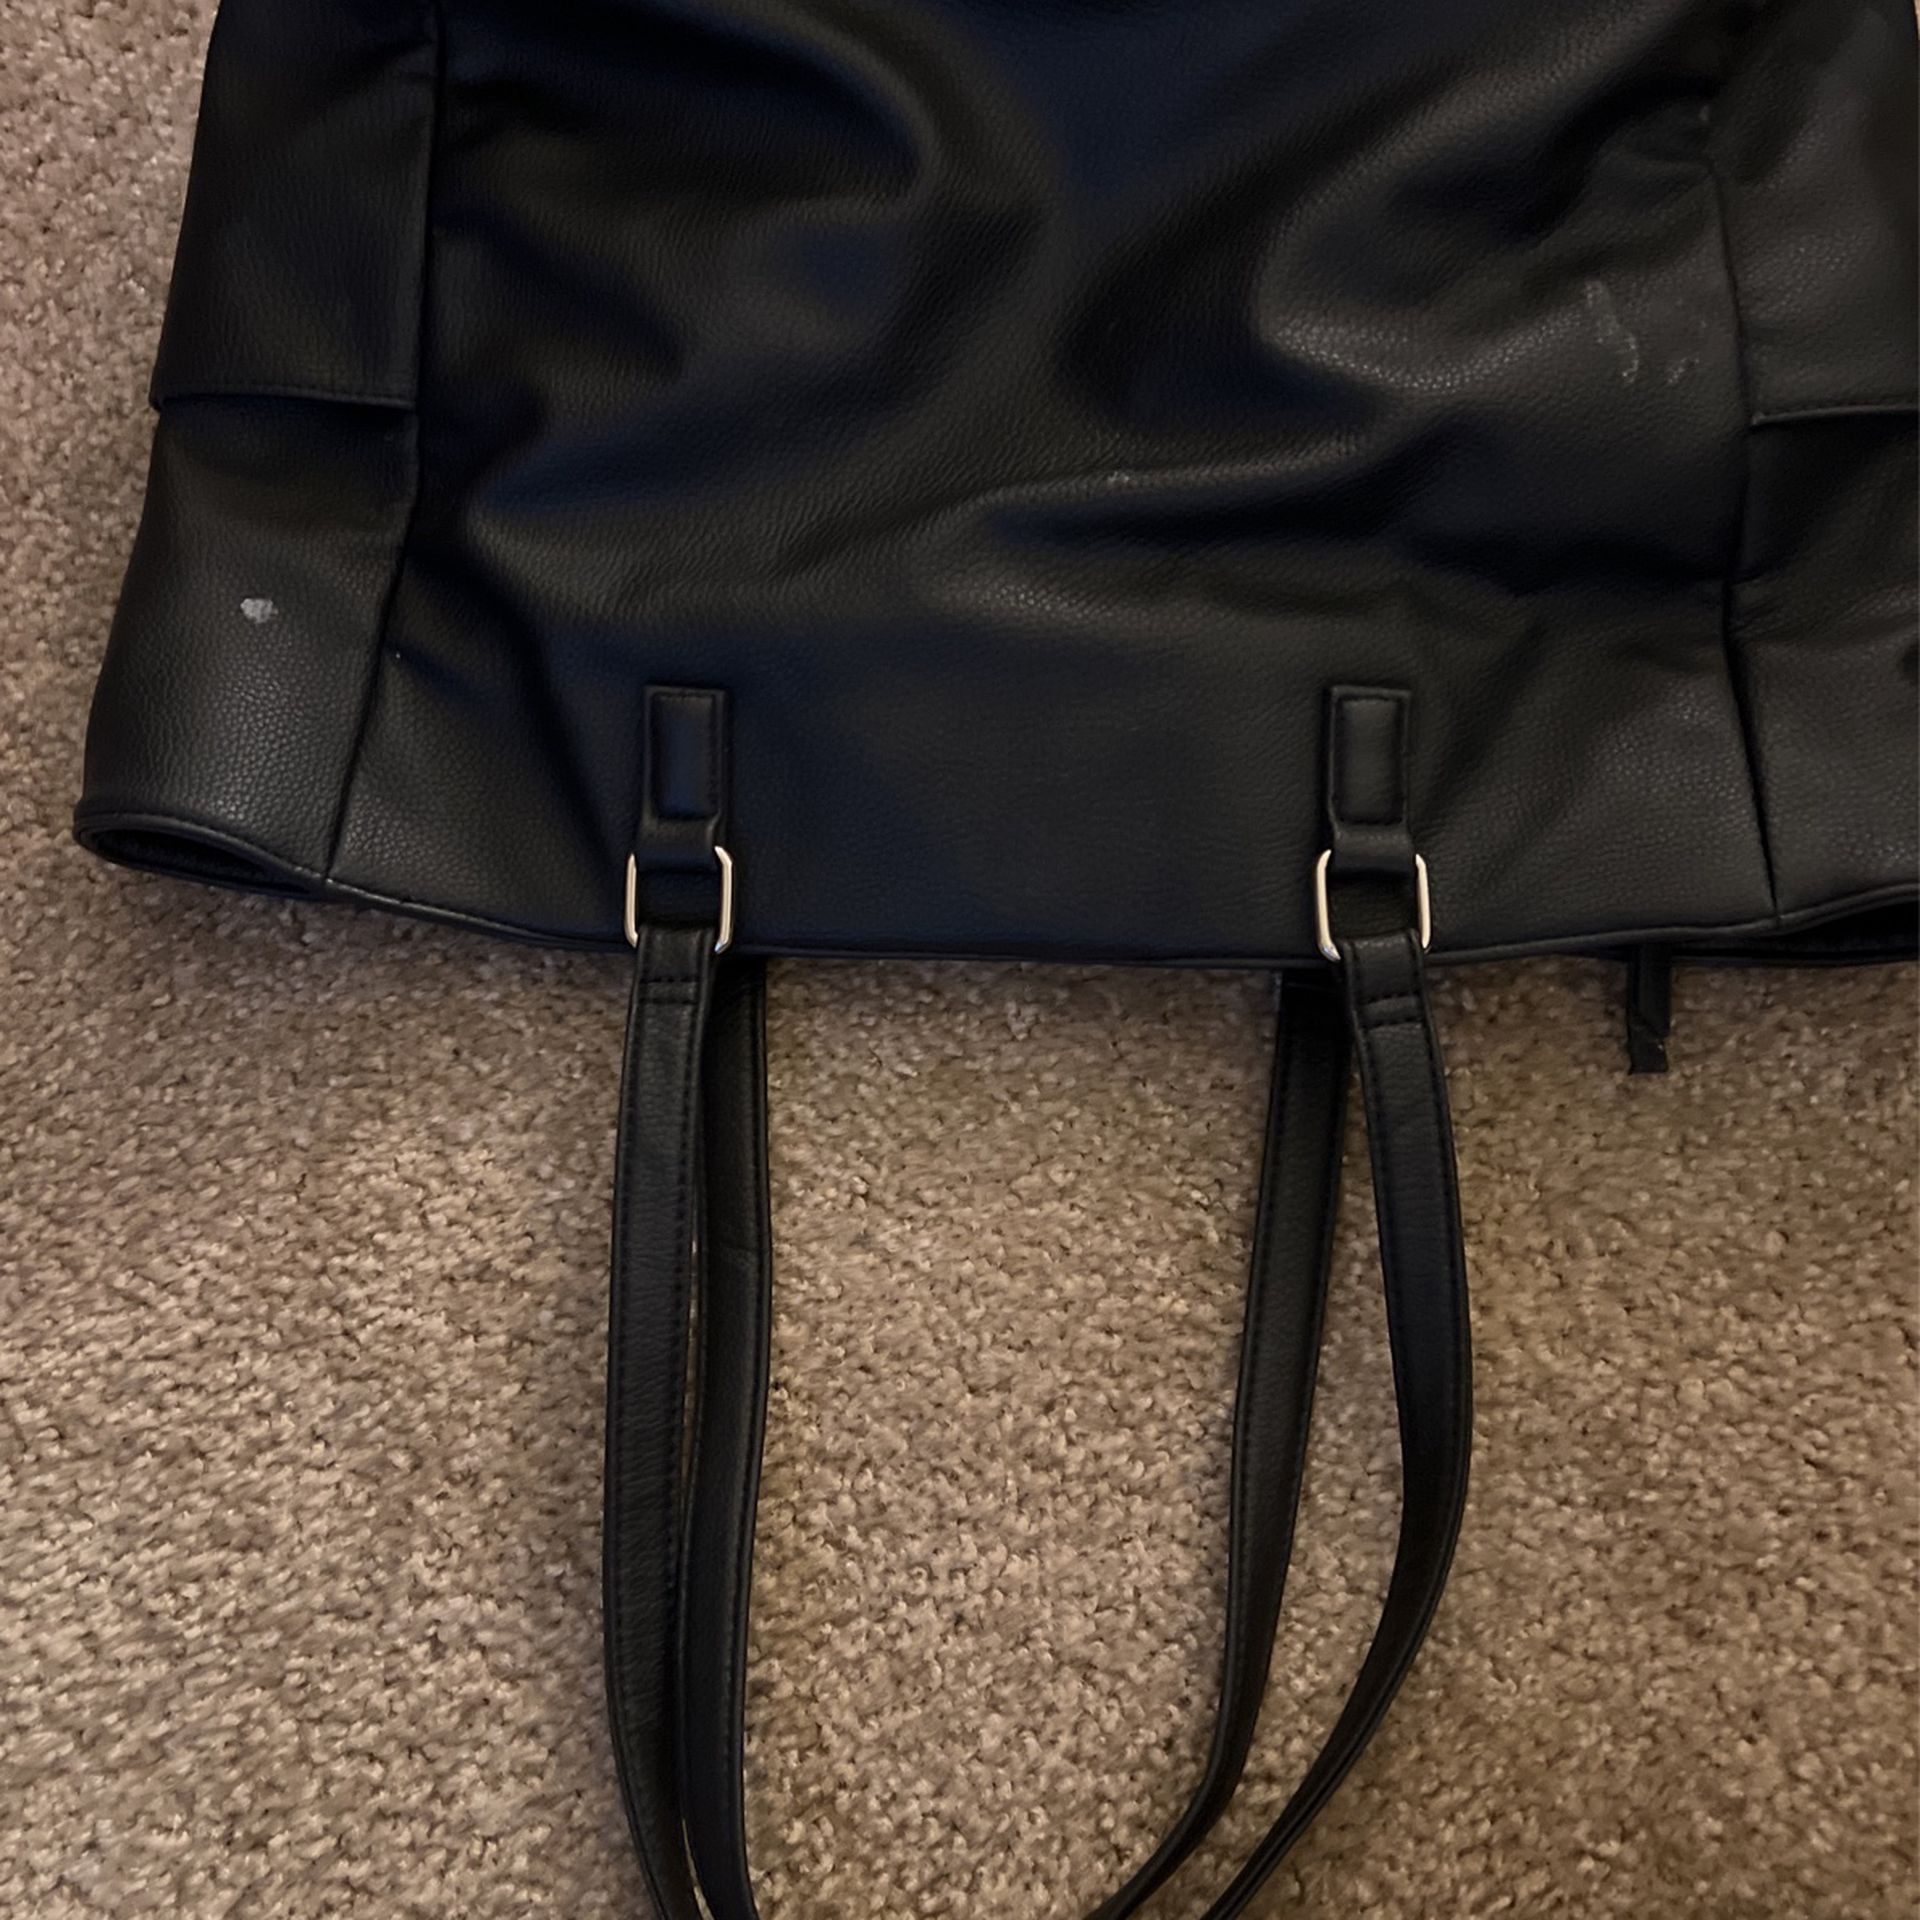  Dry Large Black Bag In Great Condition With Many Compartments 